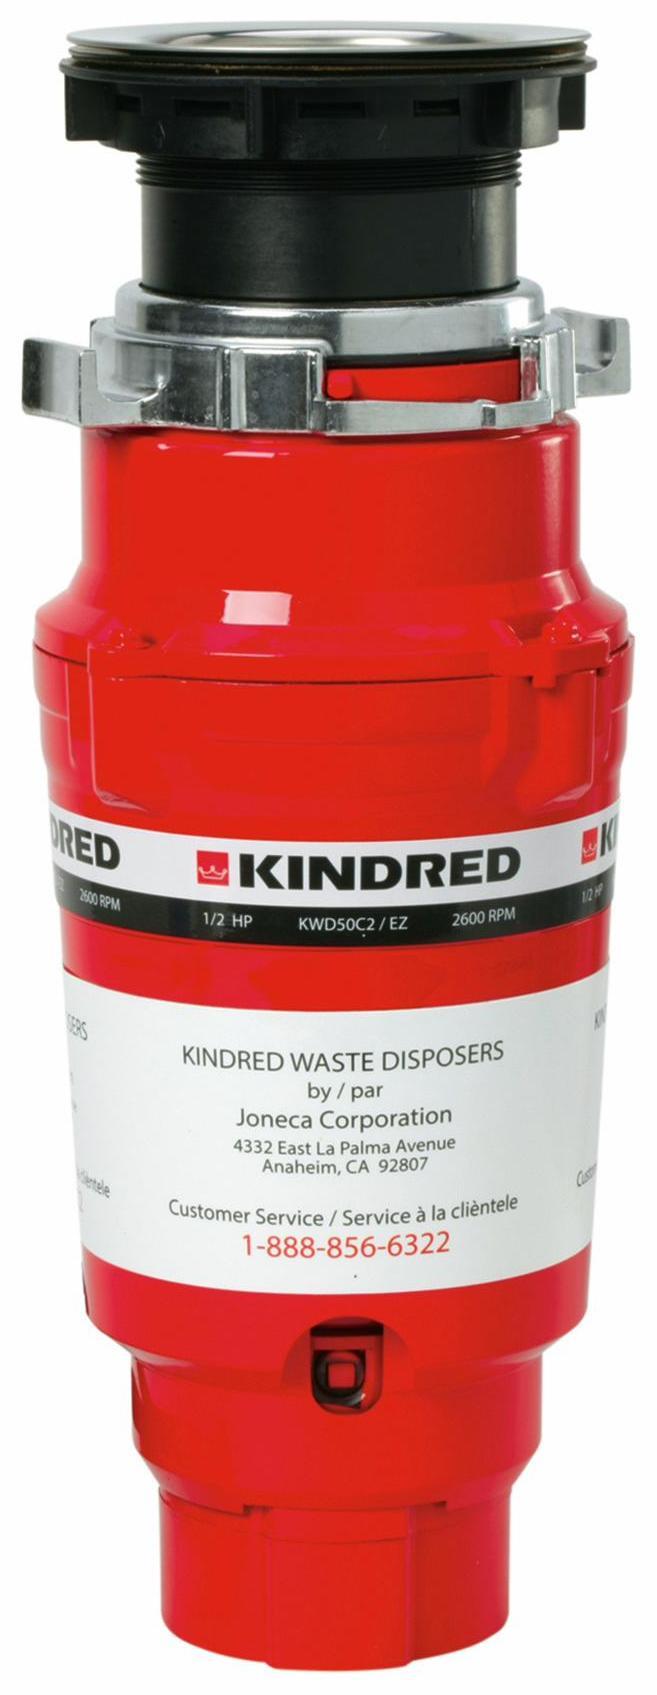 Kindred KWD50C2-EZ Continuous Feed 1/2 HP Waste Disposer